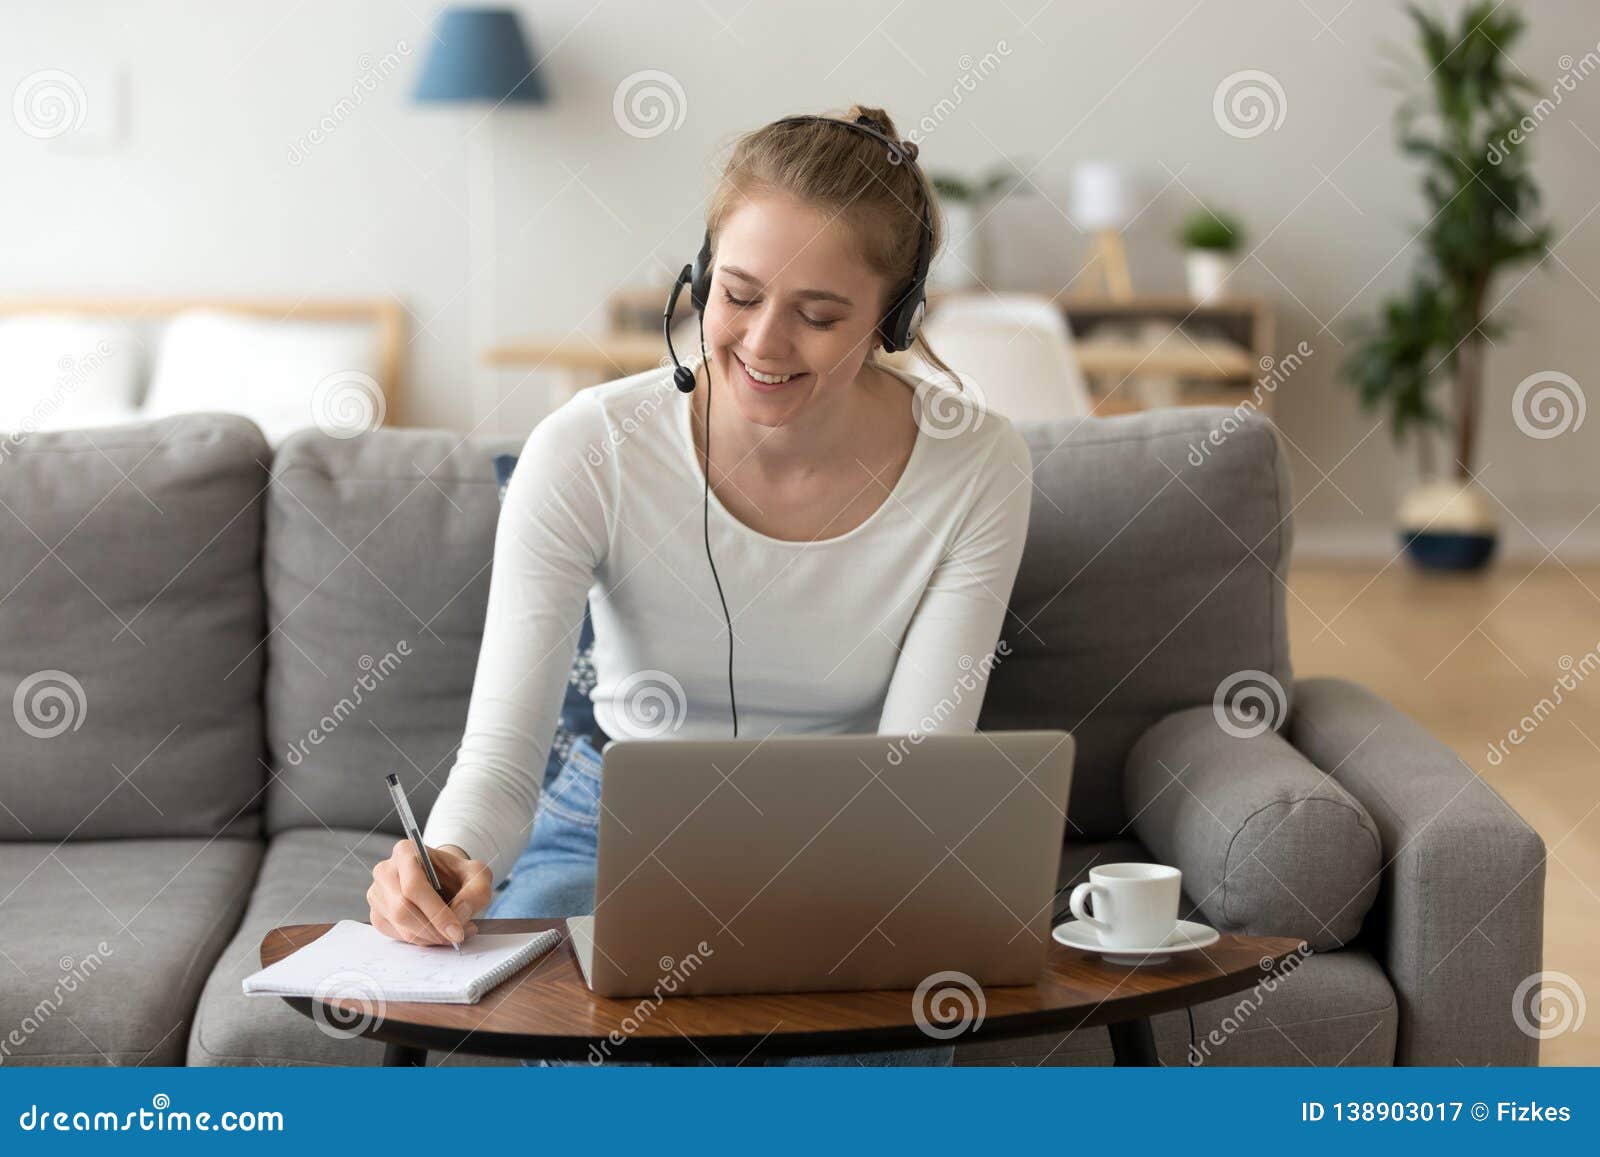 happy girl interpreter in headset write notes study on laptop